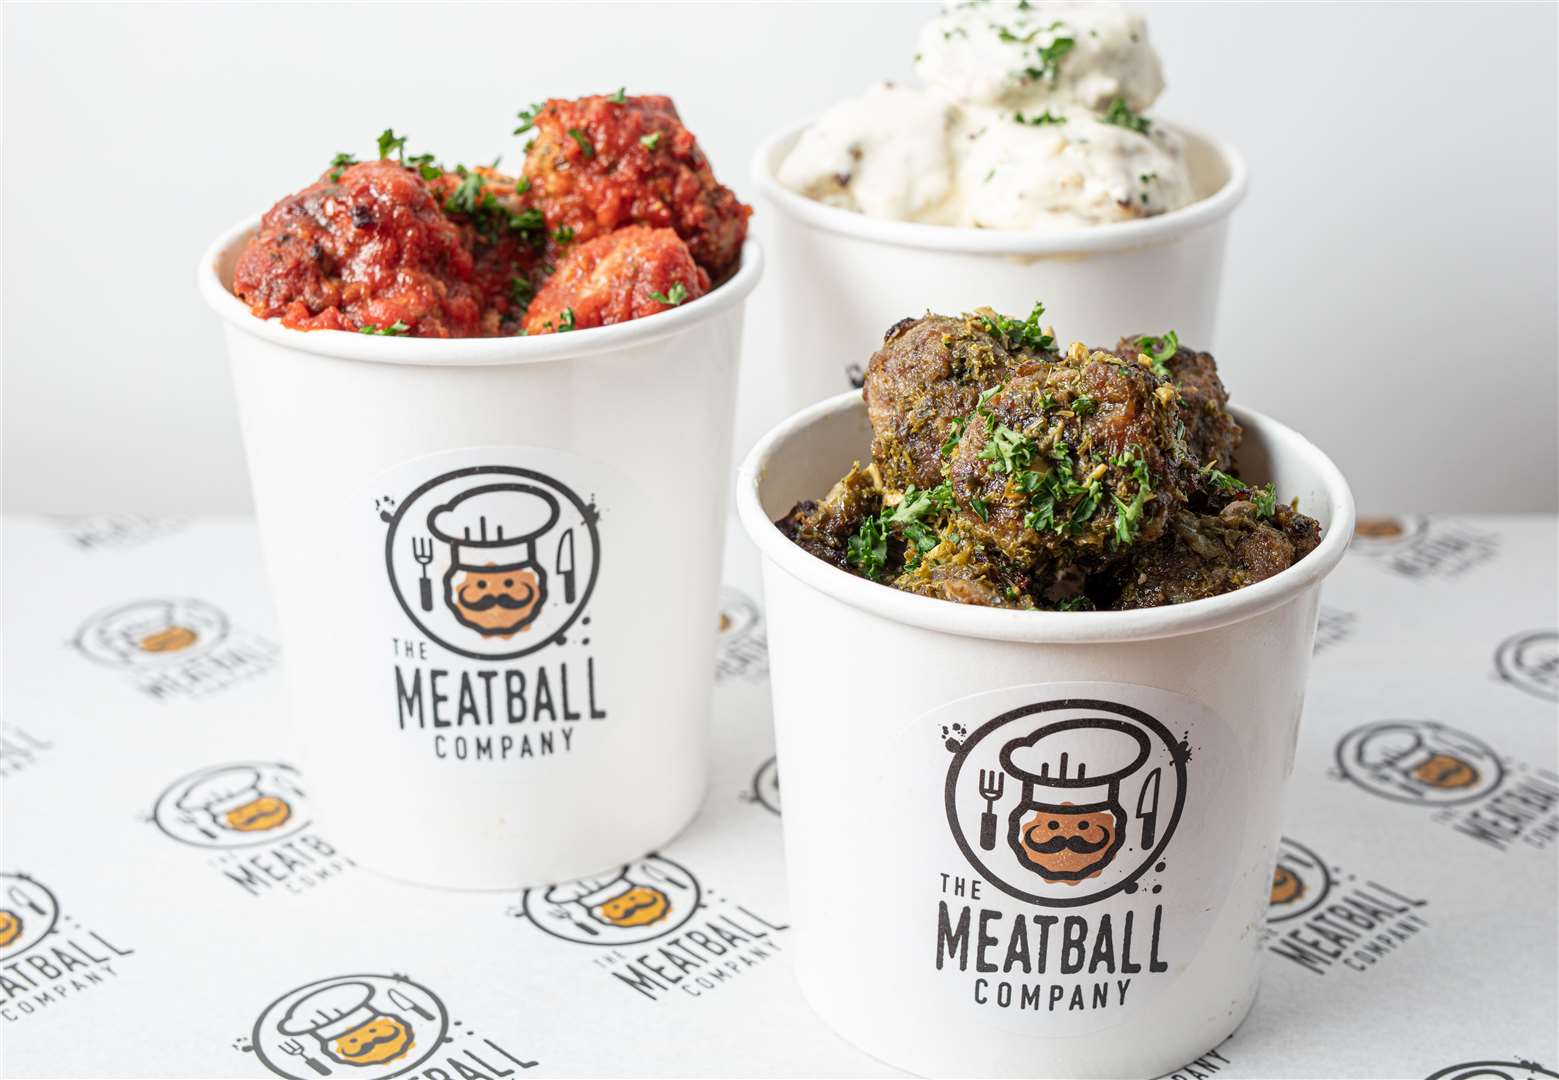 The Meatball Company in Deal